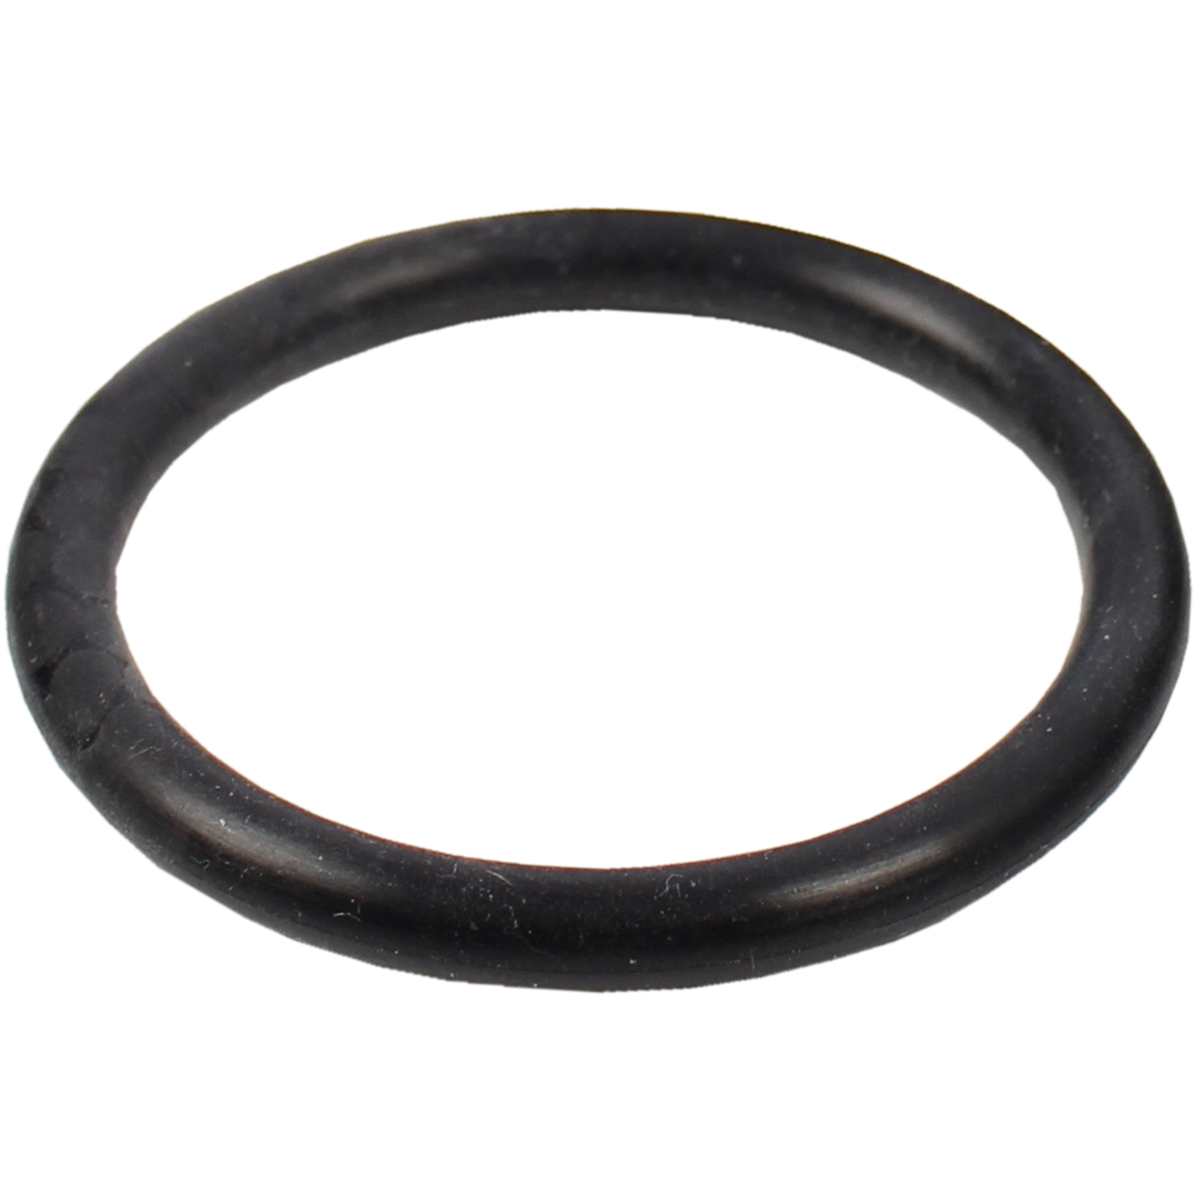 O-ring seal silicone 50 x 6 mm (1.97